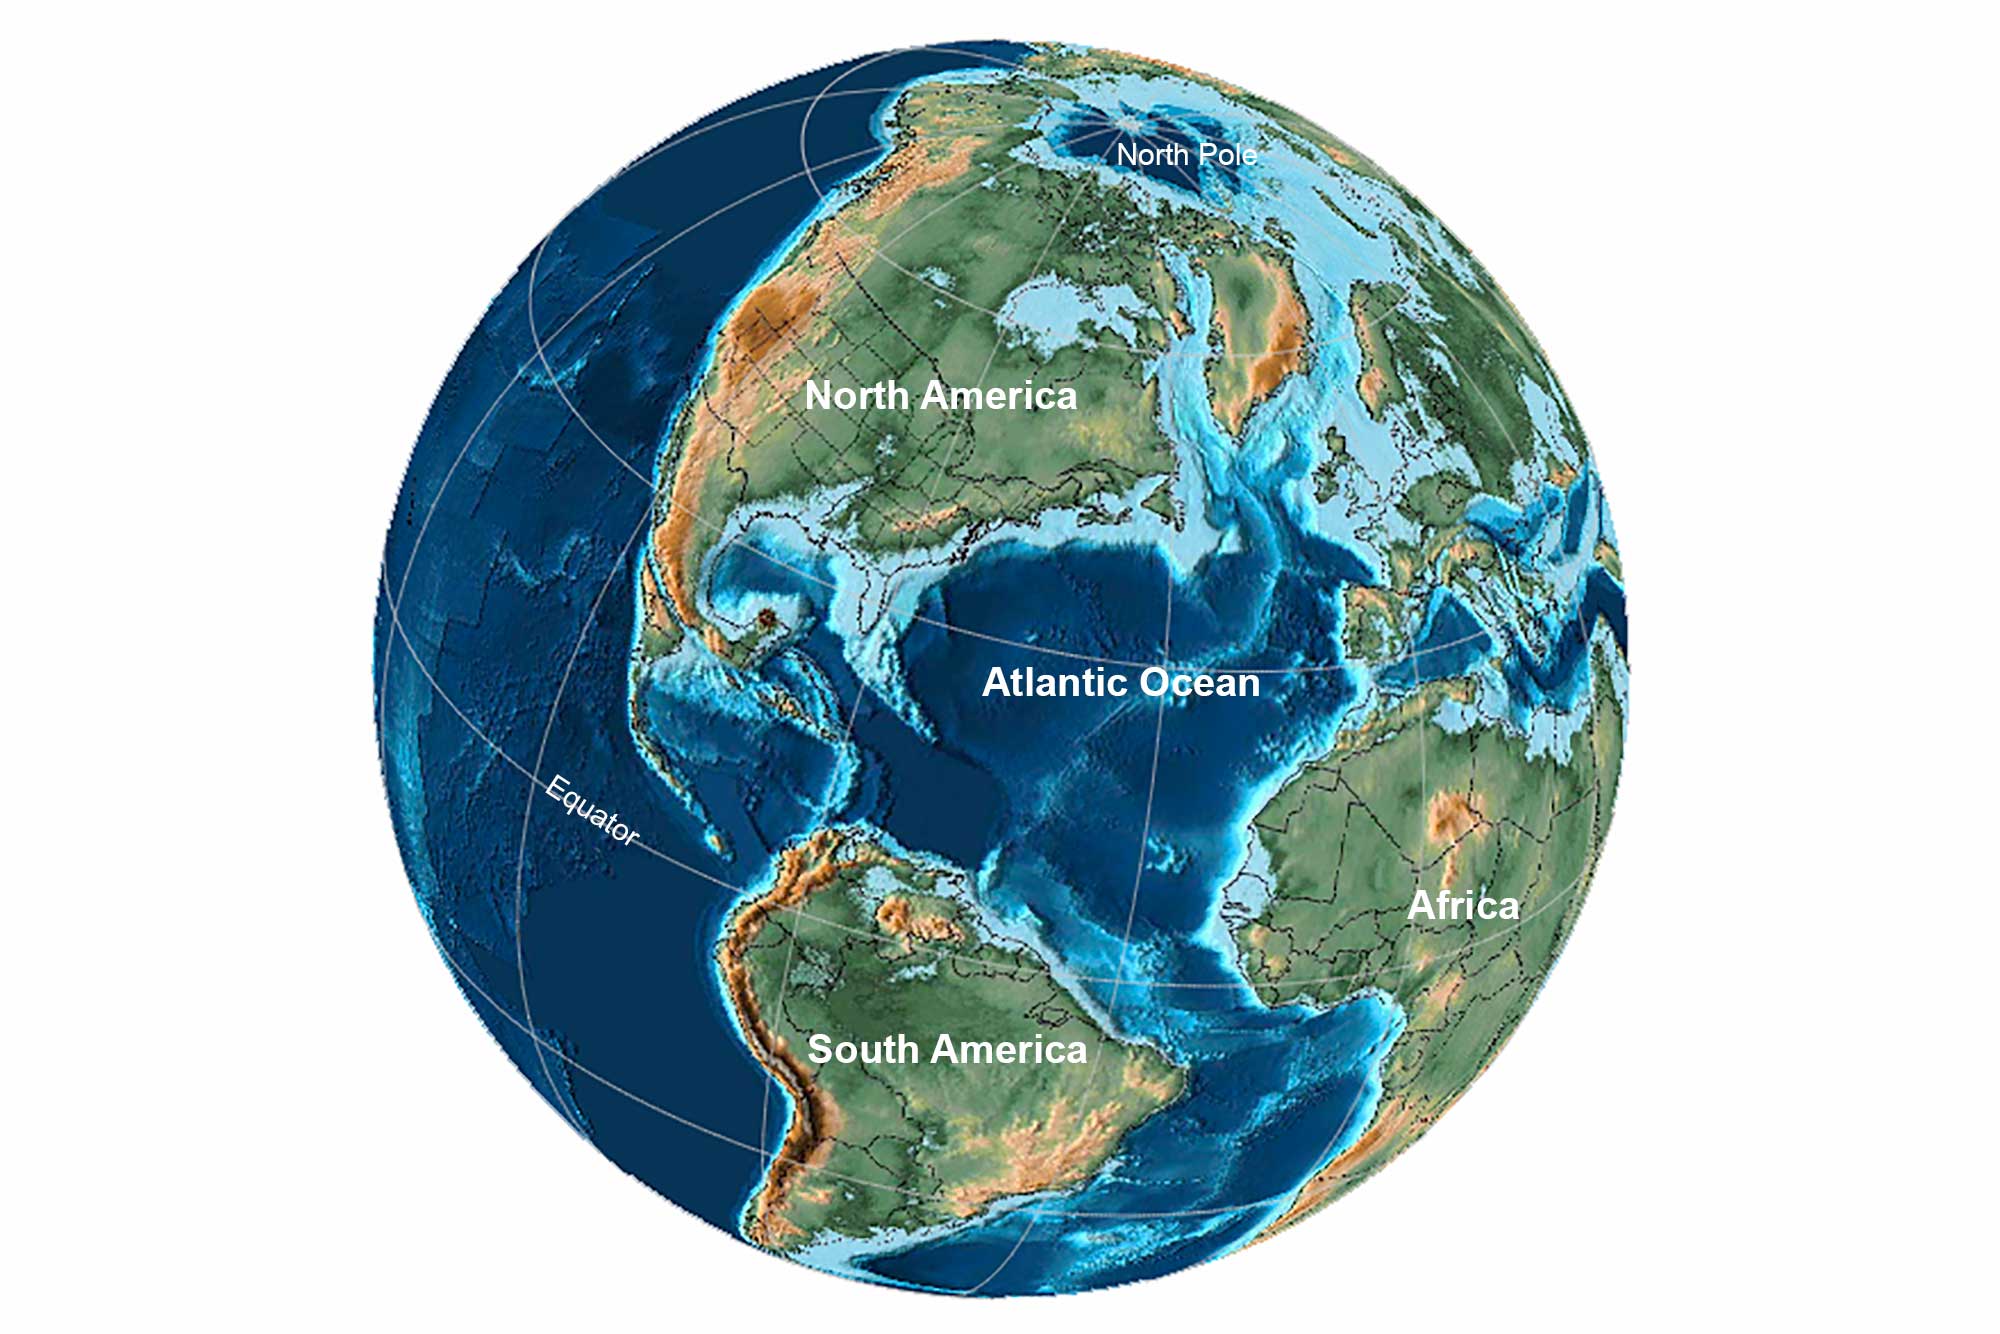 Reconstruction of the Earth at the end of the Cretaceous Period.